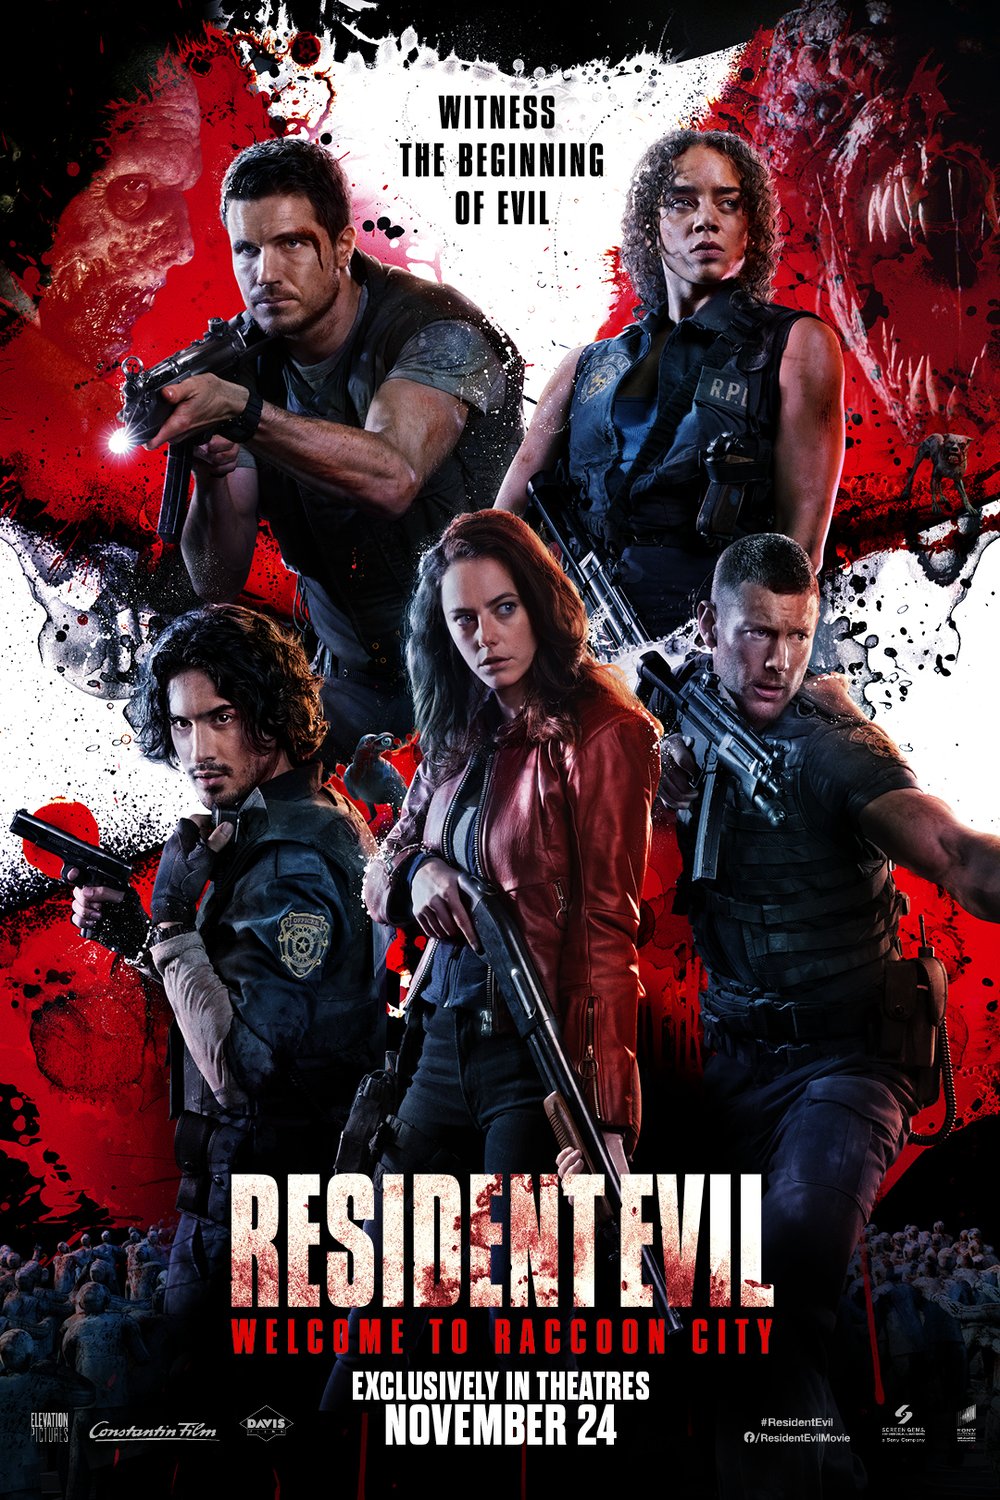 L'affiche du film Resident Evil: Welcome to Raccoon City